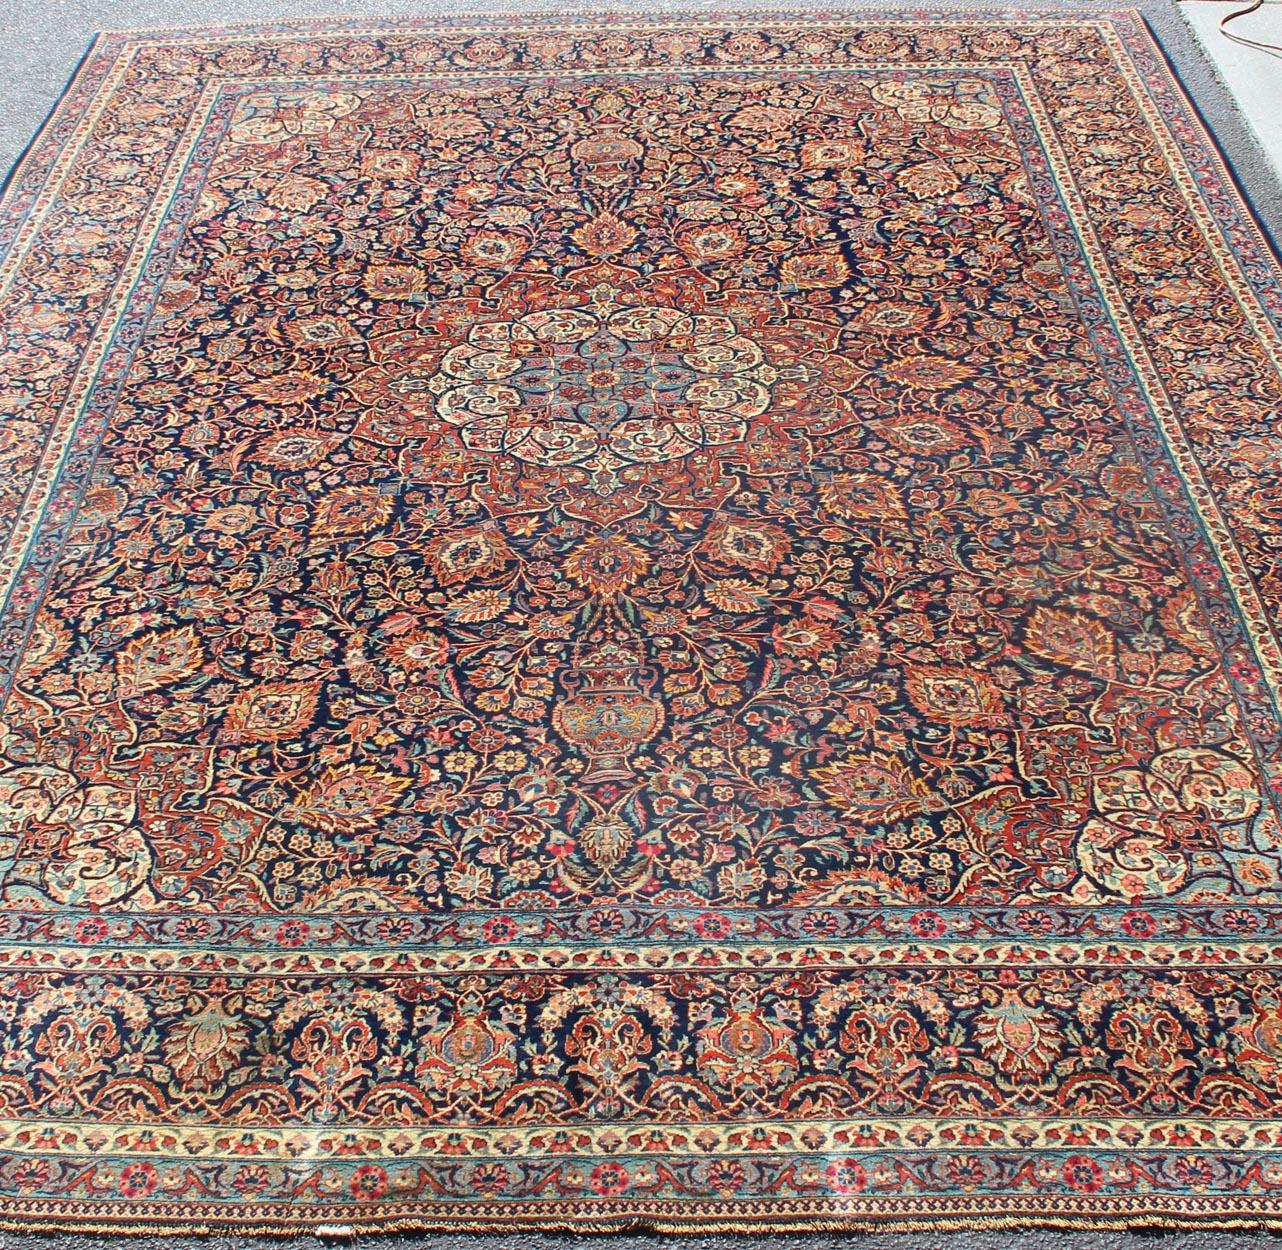 Wool Persian Kashan All-Over Floral Fine Weave in Navy Background For Sale